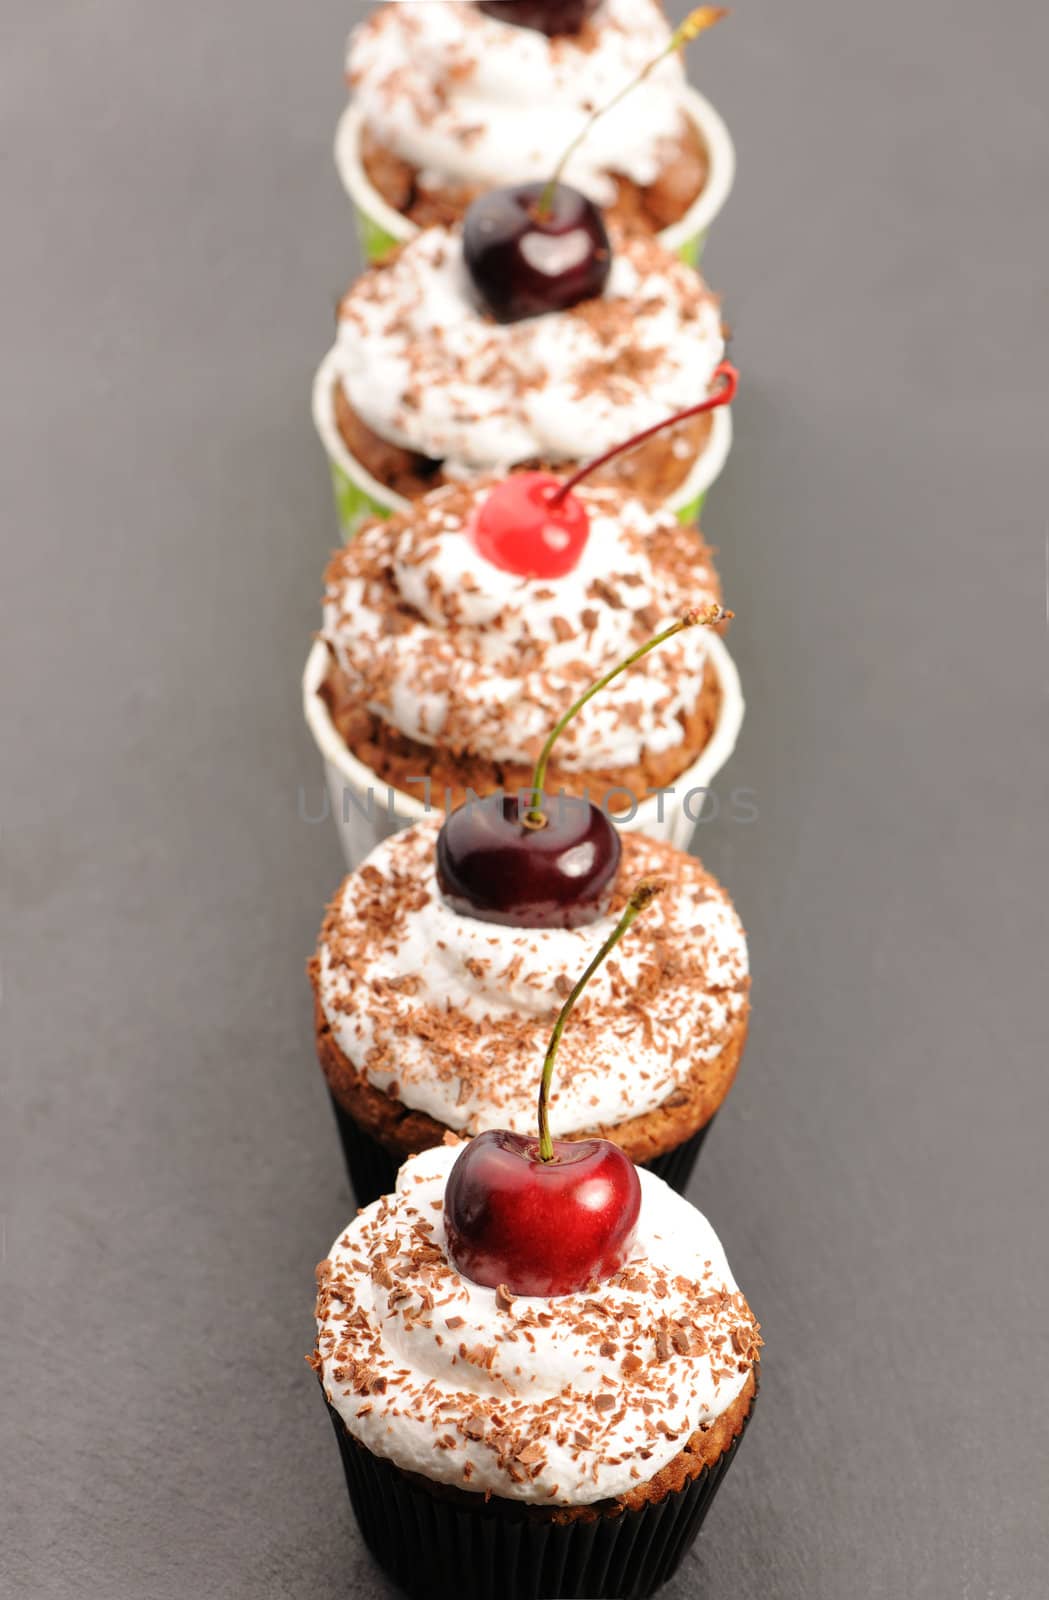 Cupcakes with whipped cream and cherry on a table